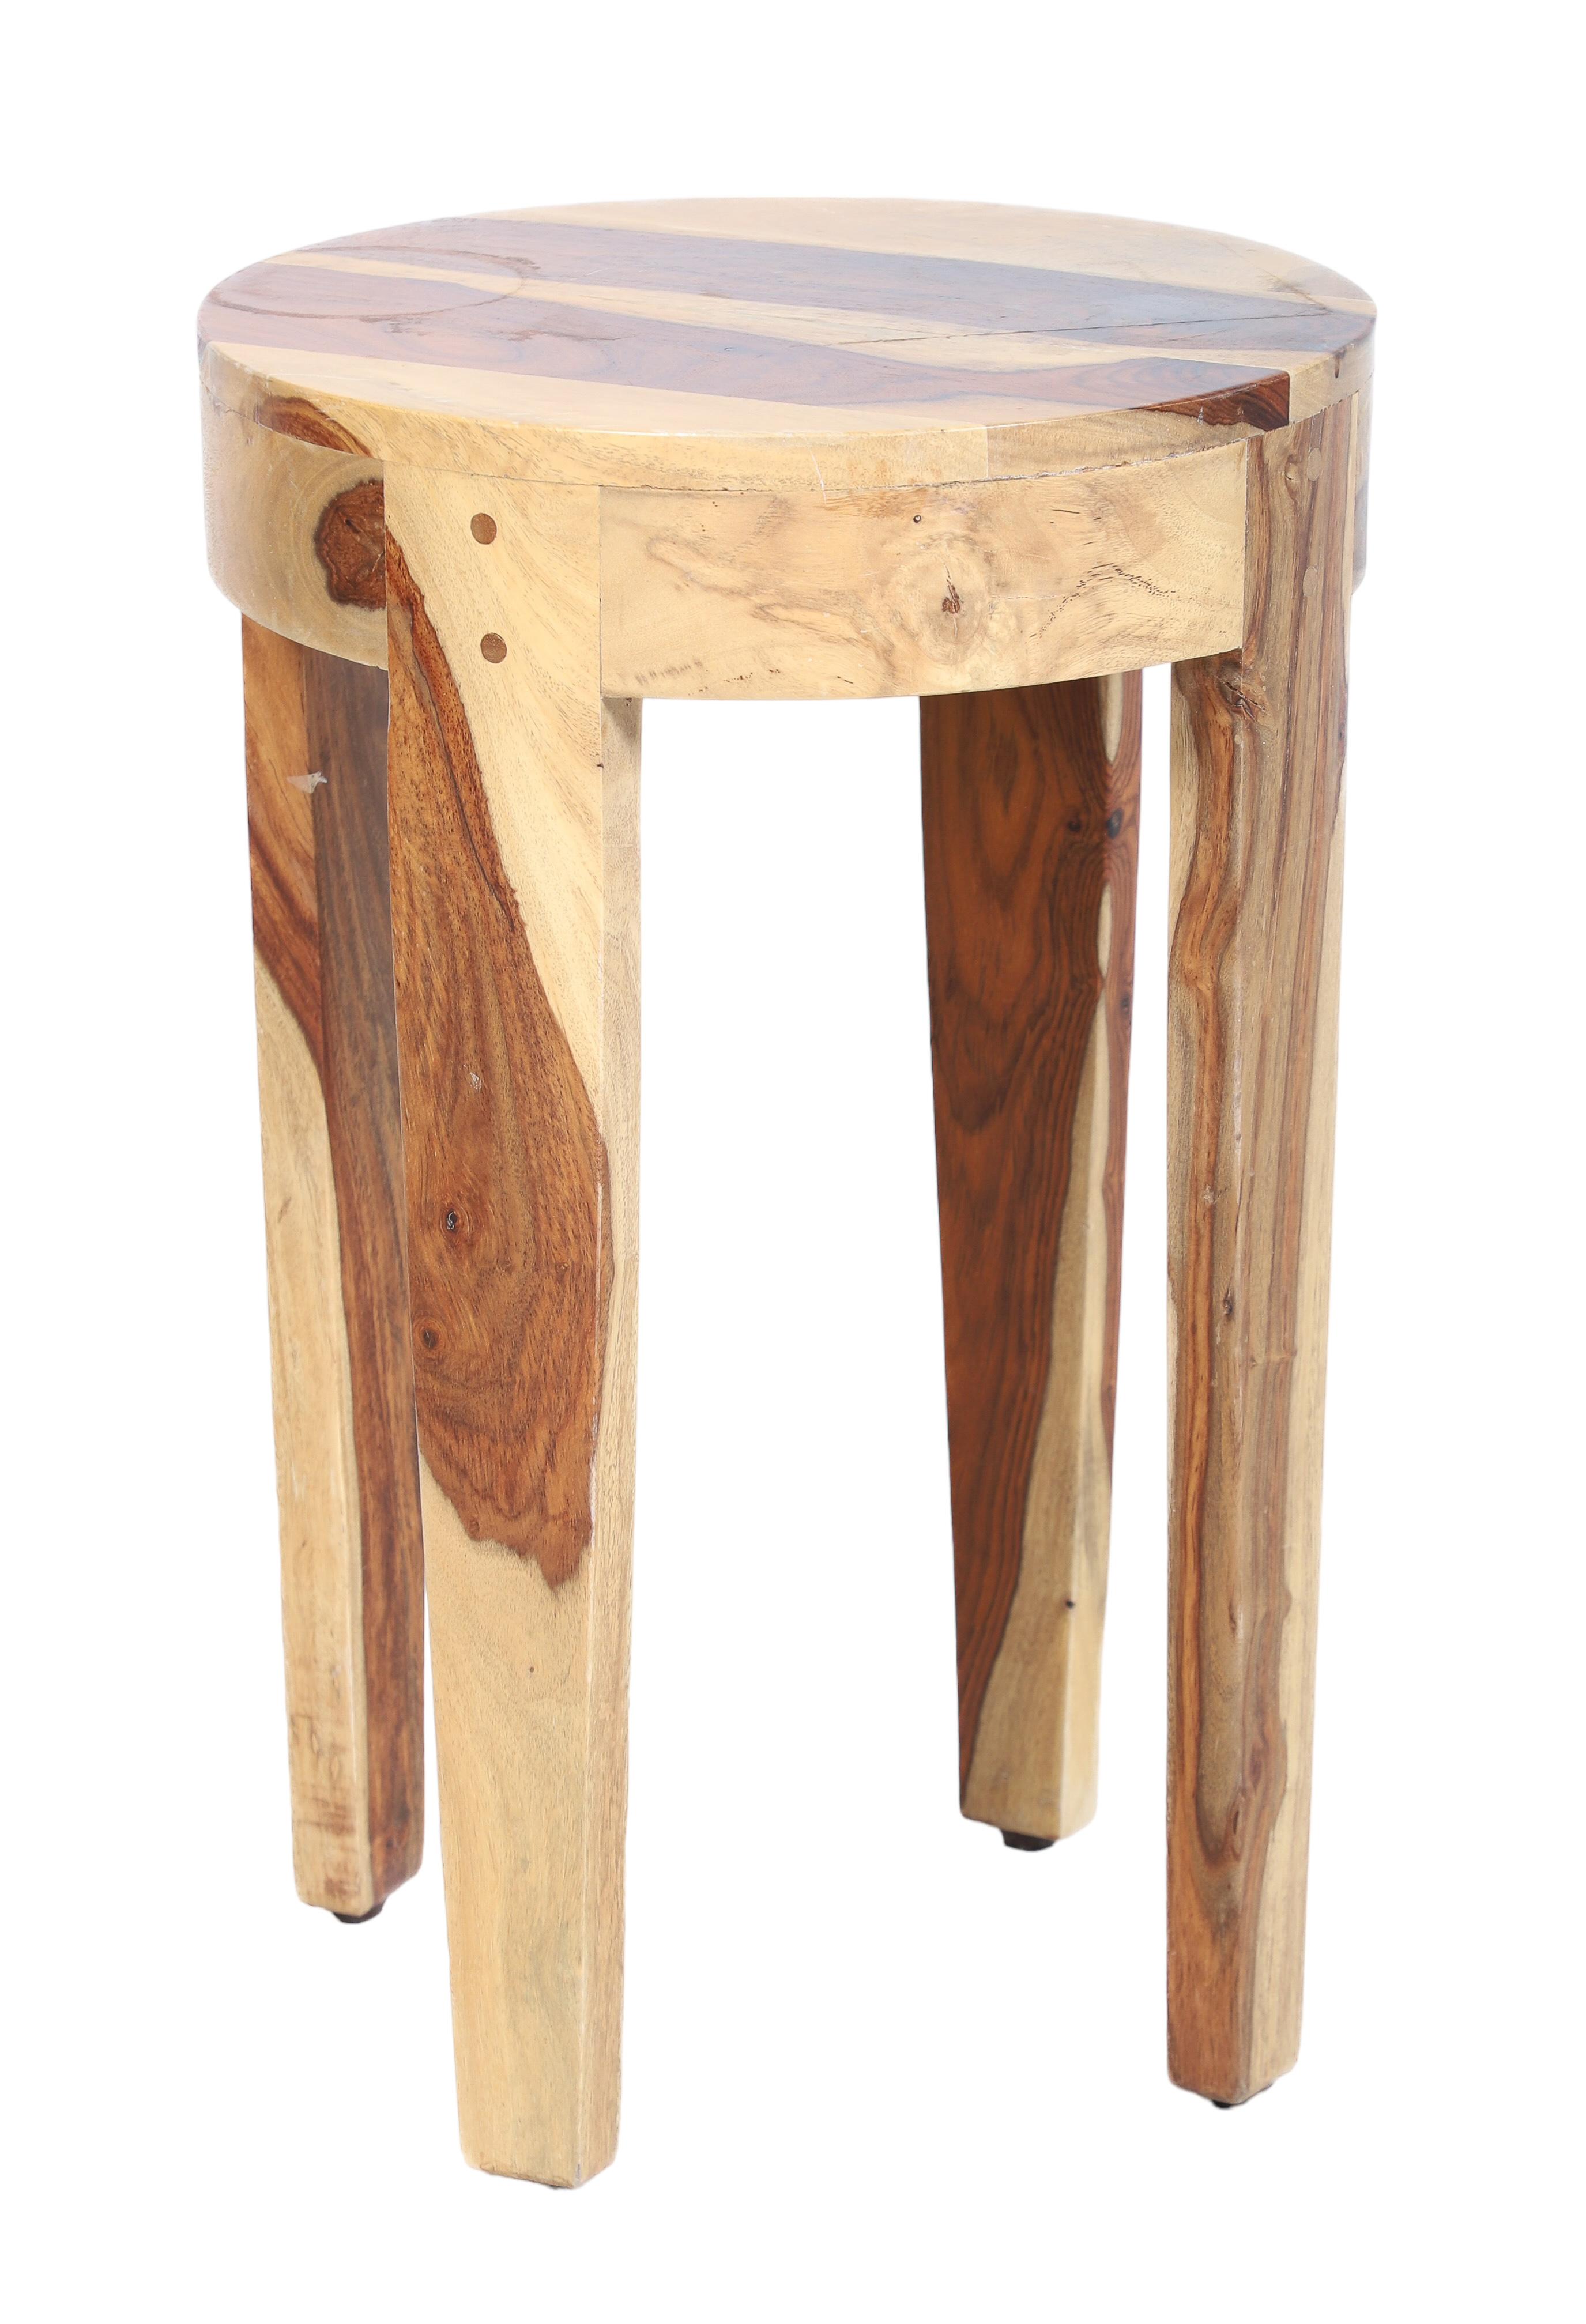 Modern Design mixed wood side table,